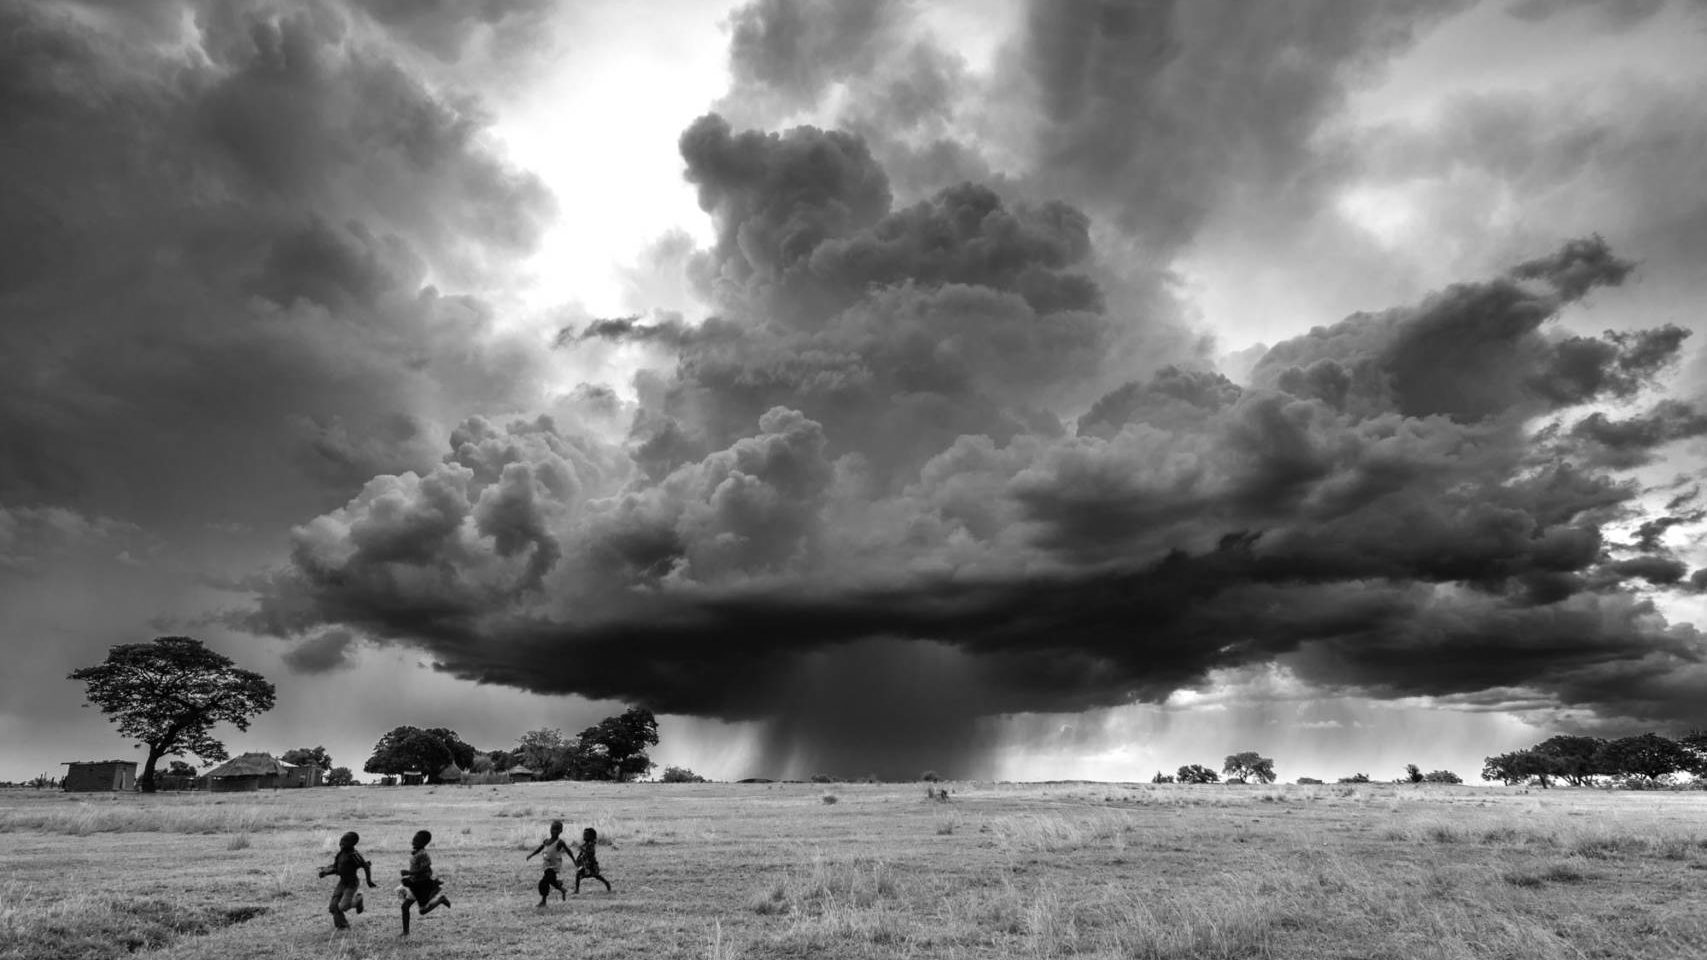 One of our favorite photos of 2016 is of a dramatic storm in Zambia.